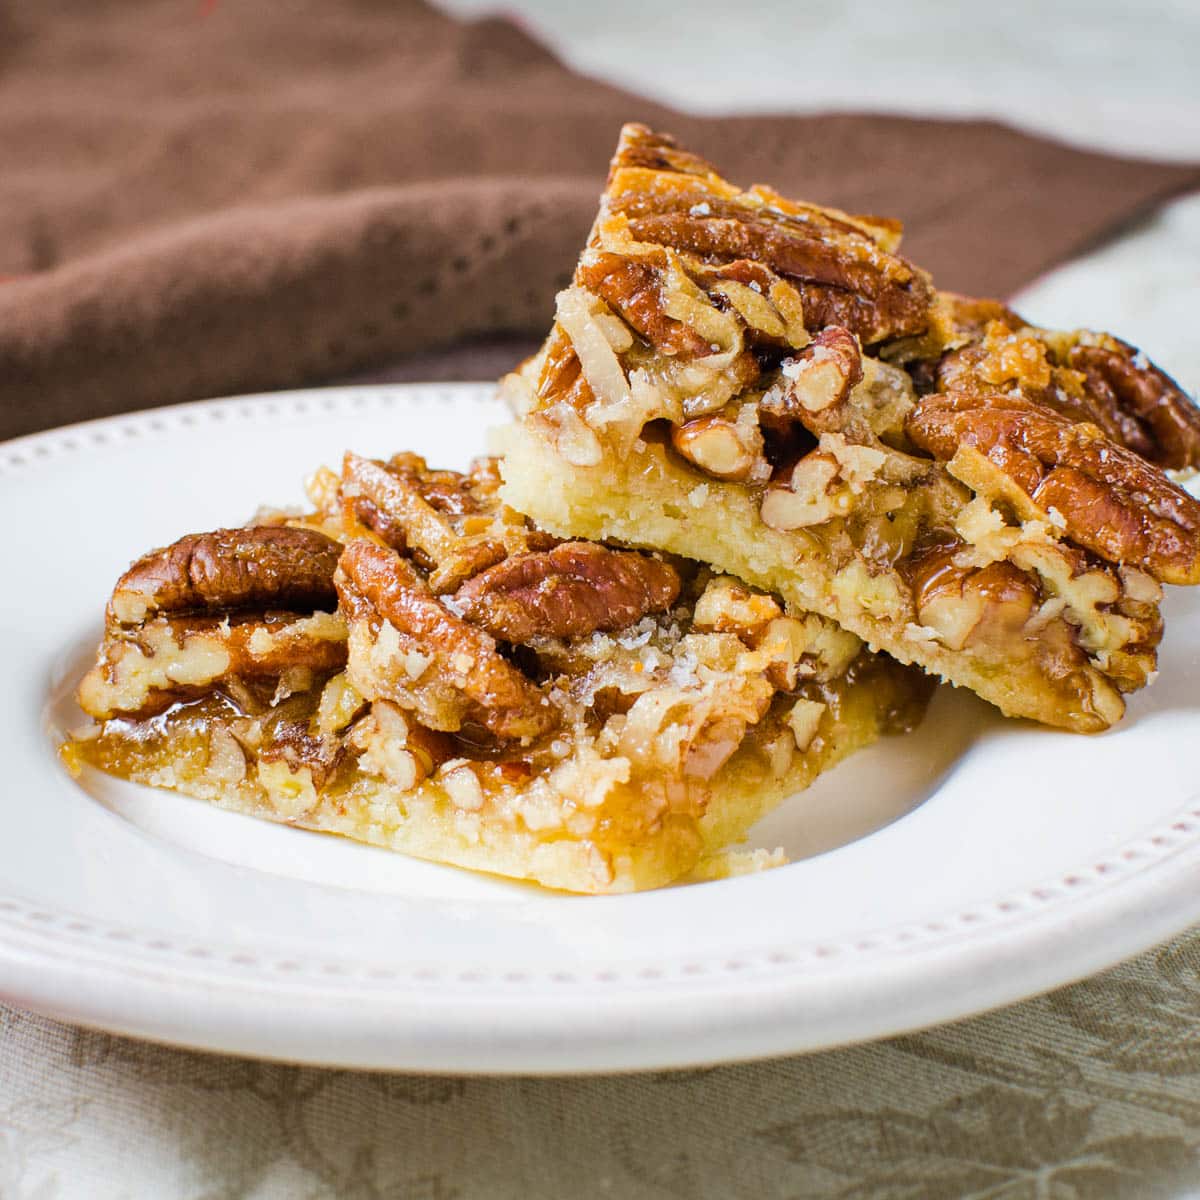 Coconut pecan bars cut into squares and served on a white plate.